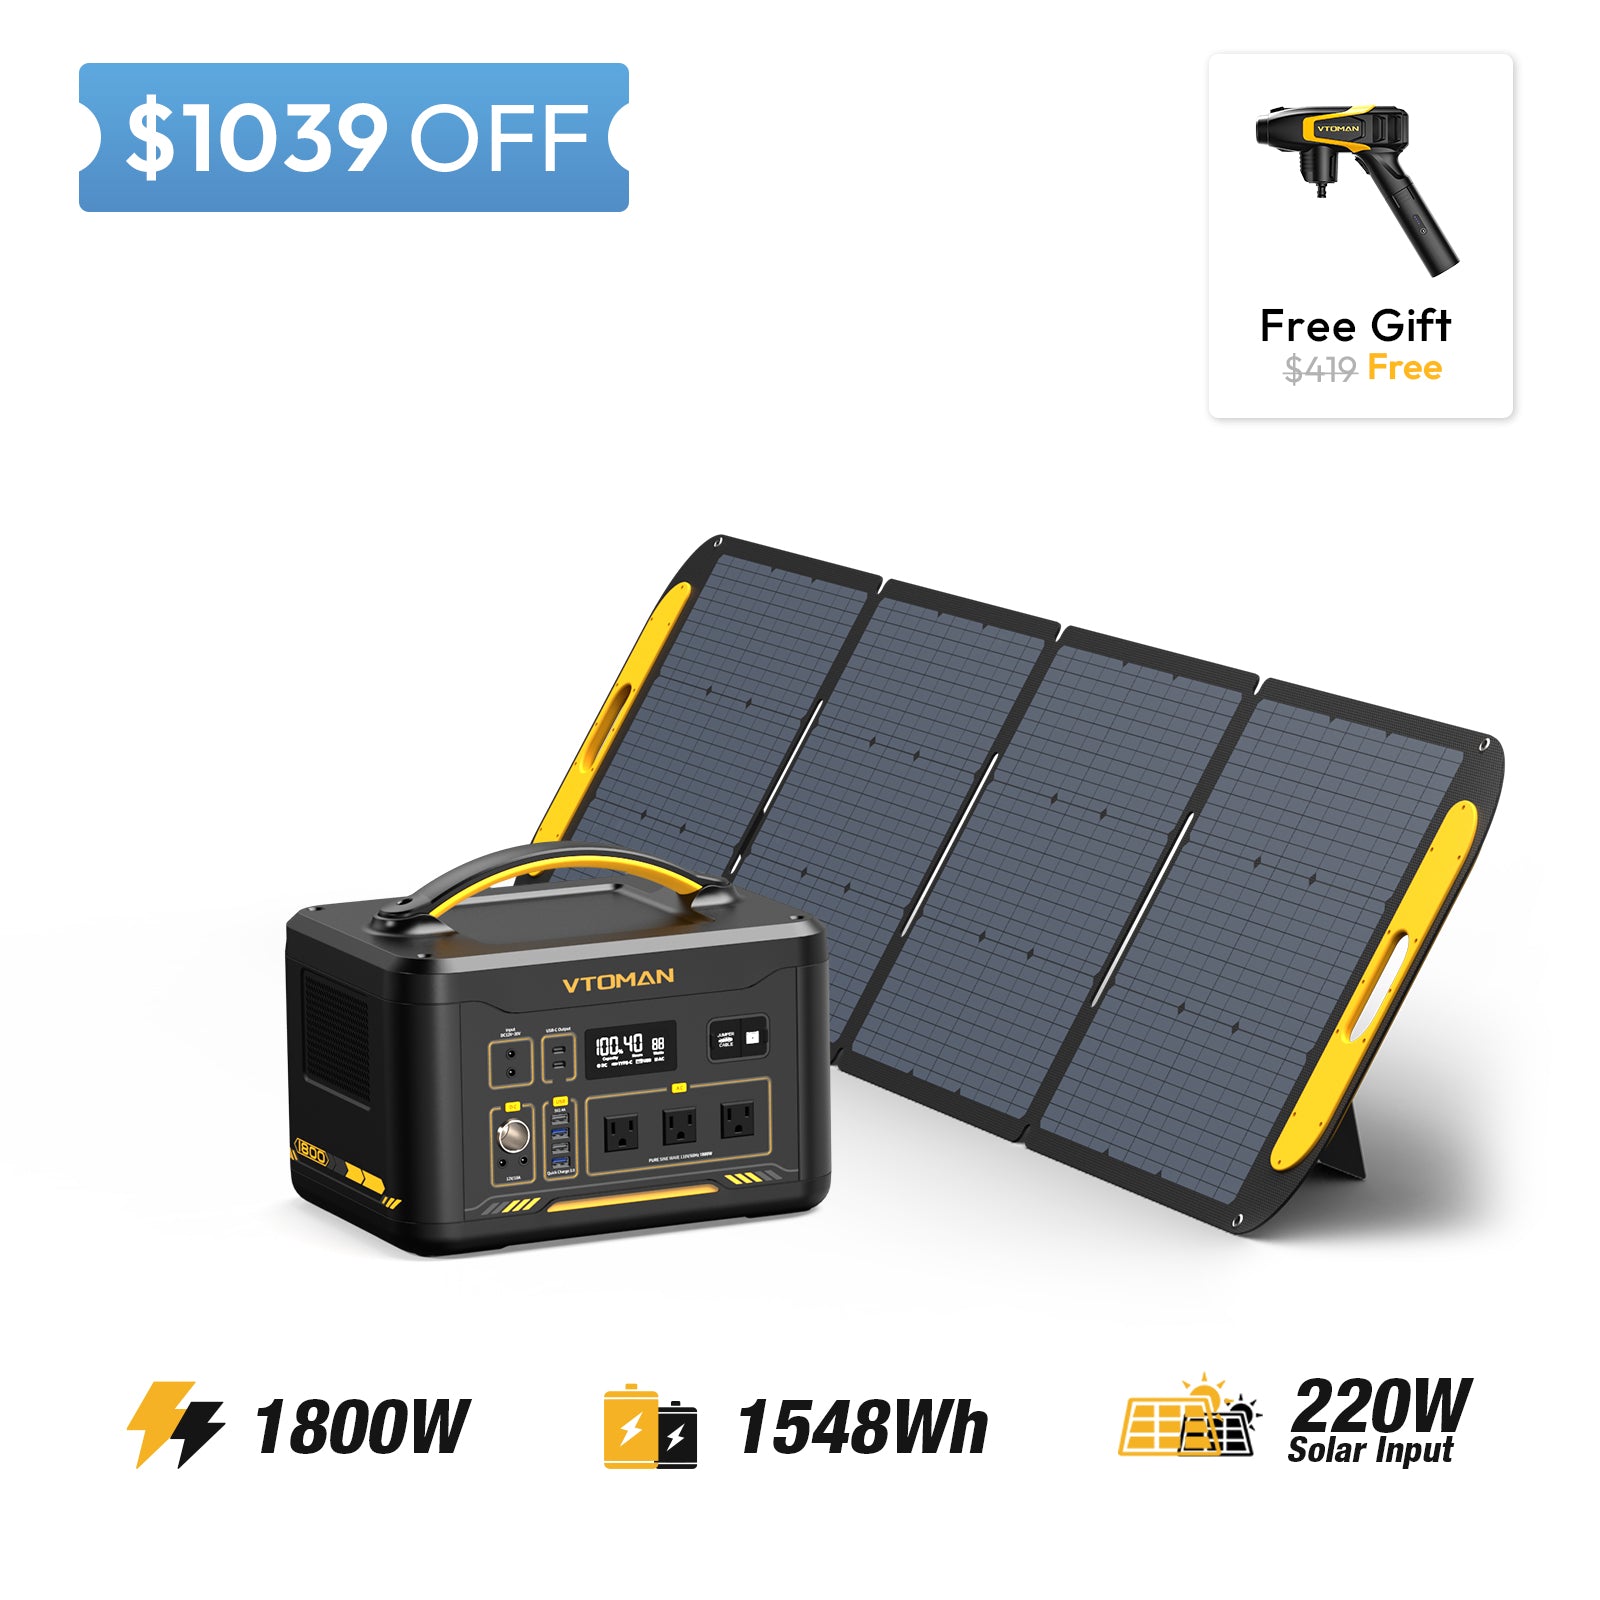 jump 1800 and 220w solar panel save $1039 in summer sale